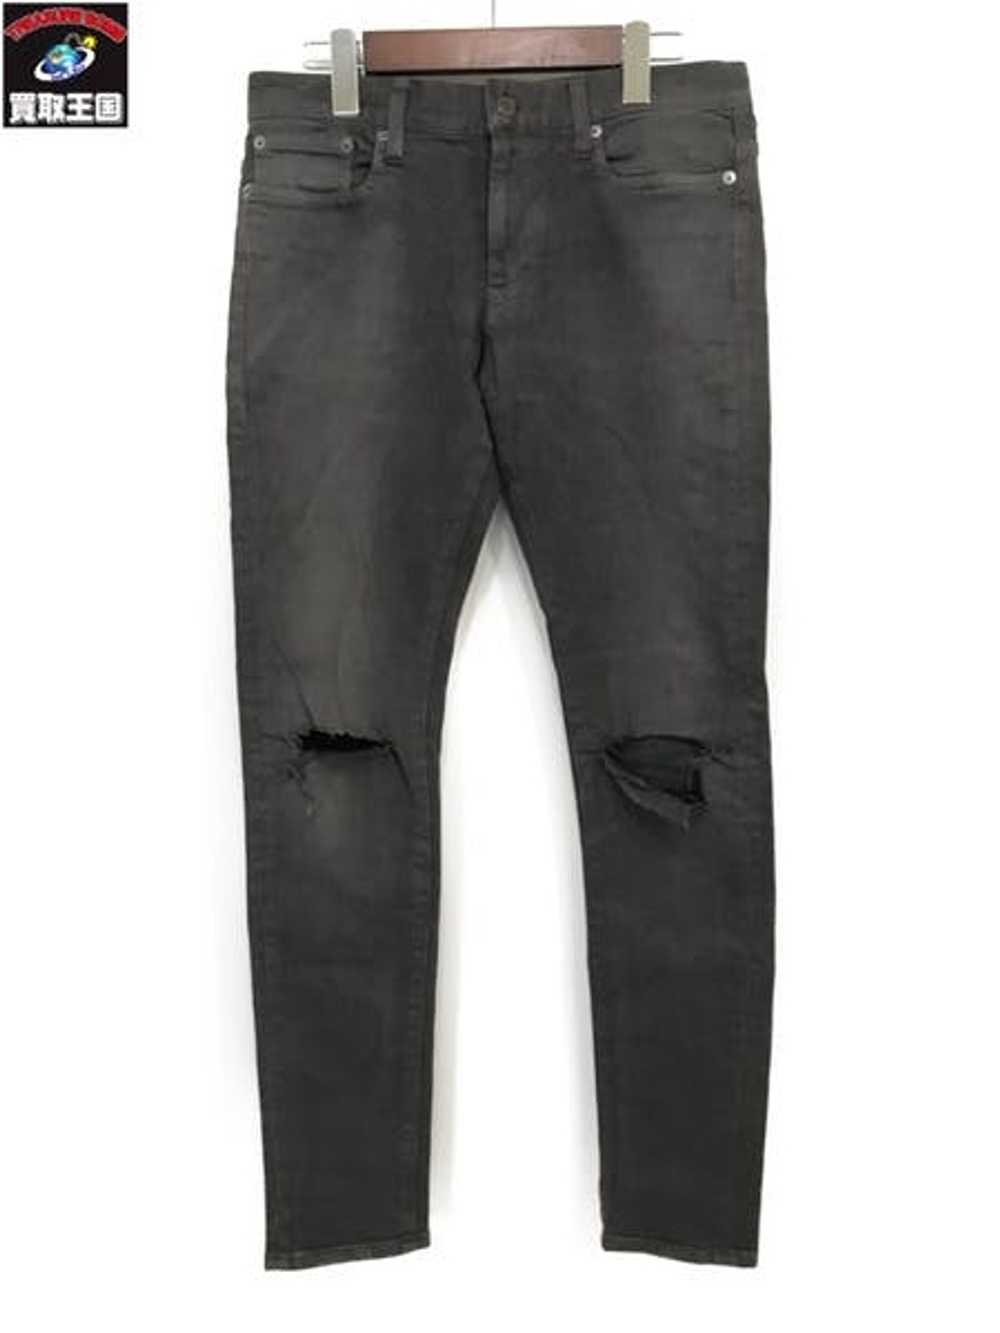 Undercover ripped knee skinny jeans - image 1